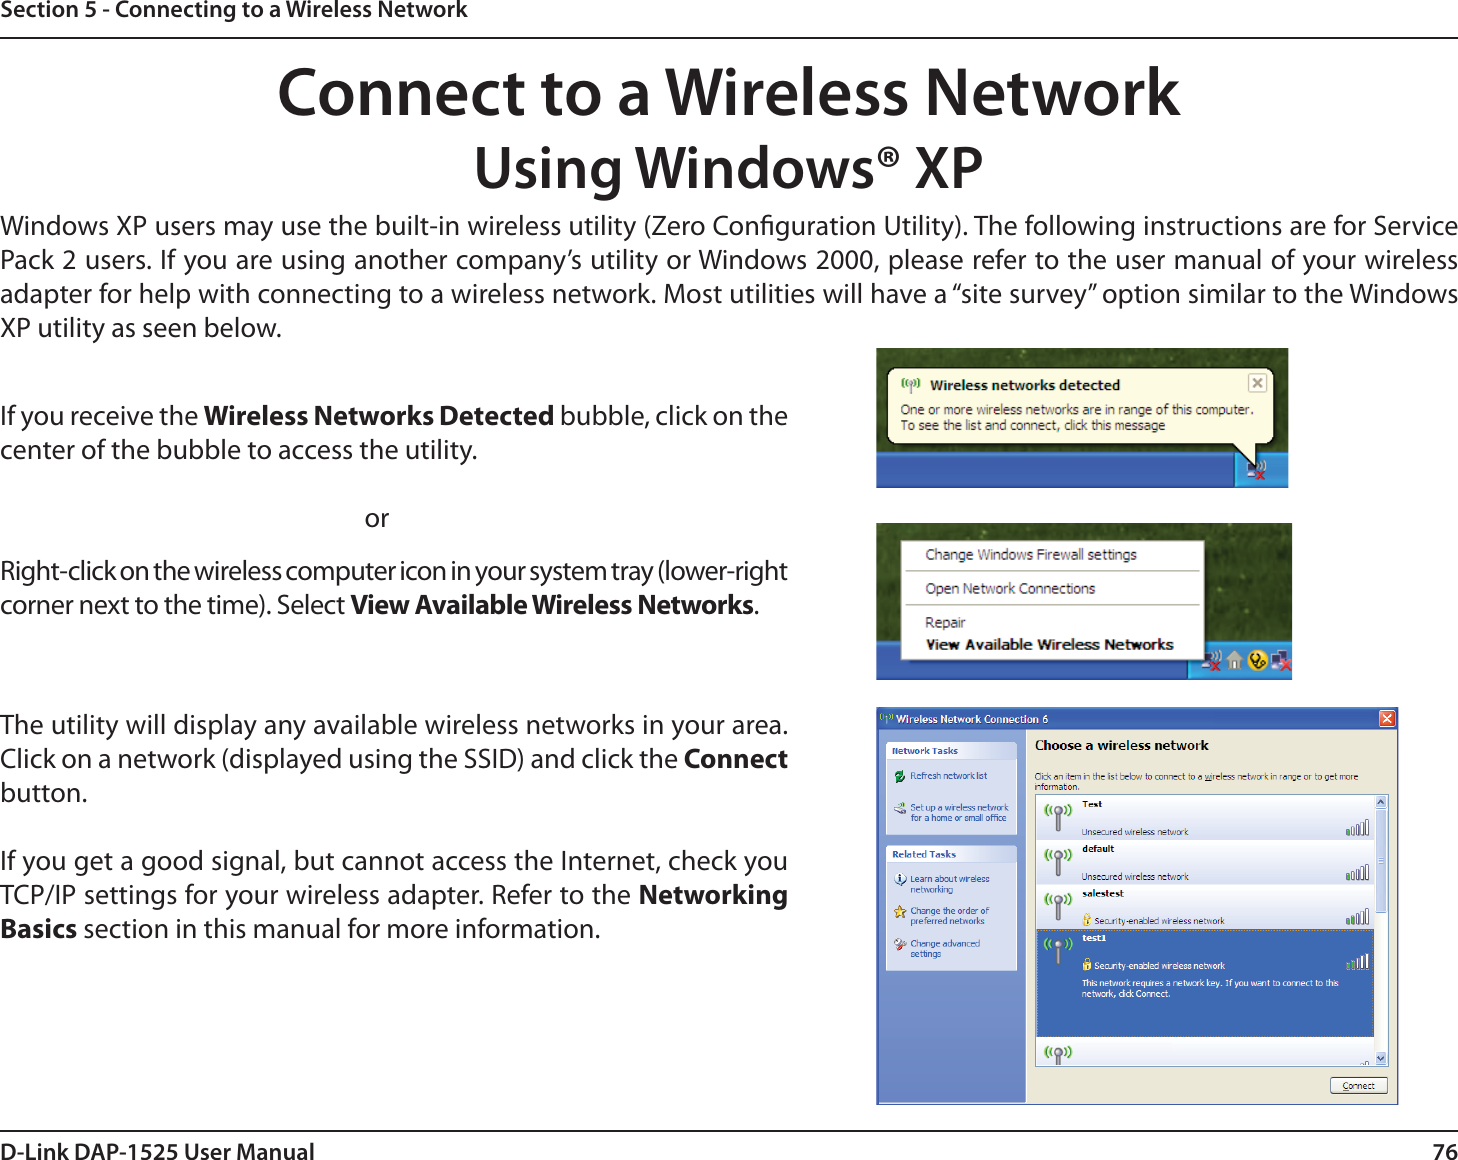 76D-Link DAP-1525 User ManualSection 5 - Connecting to a Wireless NetworkConnect to a Wireless NetworkUsing Windows® XPWindows XP users may use the built-in wireless utility (Zero Conguration Utility). The following instructions are for Service Pack 2 users. If you are using another company’s utility or Windows 2000, please refer to the user manual of your wireless adapter for help with connecting to a wireless network. Most utilities will have a “site survey” option similar to the Windows XP utility as seen below.Right-click on the wireless computer icon in your system tray (lower-right corner next to the time). Select View Available Wireless Networks.If you receive the Wireless Networks Detected bubble, click on the center of the bubble to access the utility.     orThe utility will display any available wireless networks in your area. Click on a network (displayed using the SSID) and click the Connect button.If you get a good signal, but cannot access the Internet, check you TCP/IP settings for your wireless adapter. Refer to the Networking Basics section in this manual for more information.